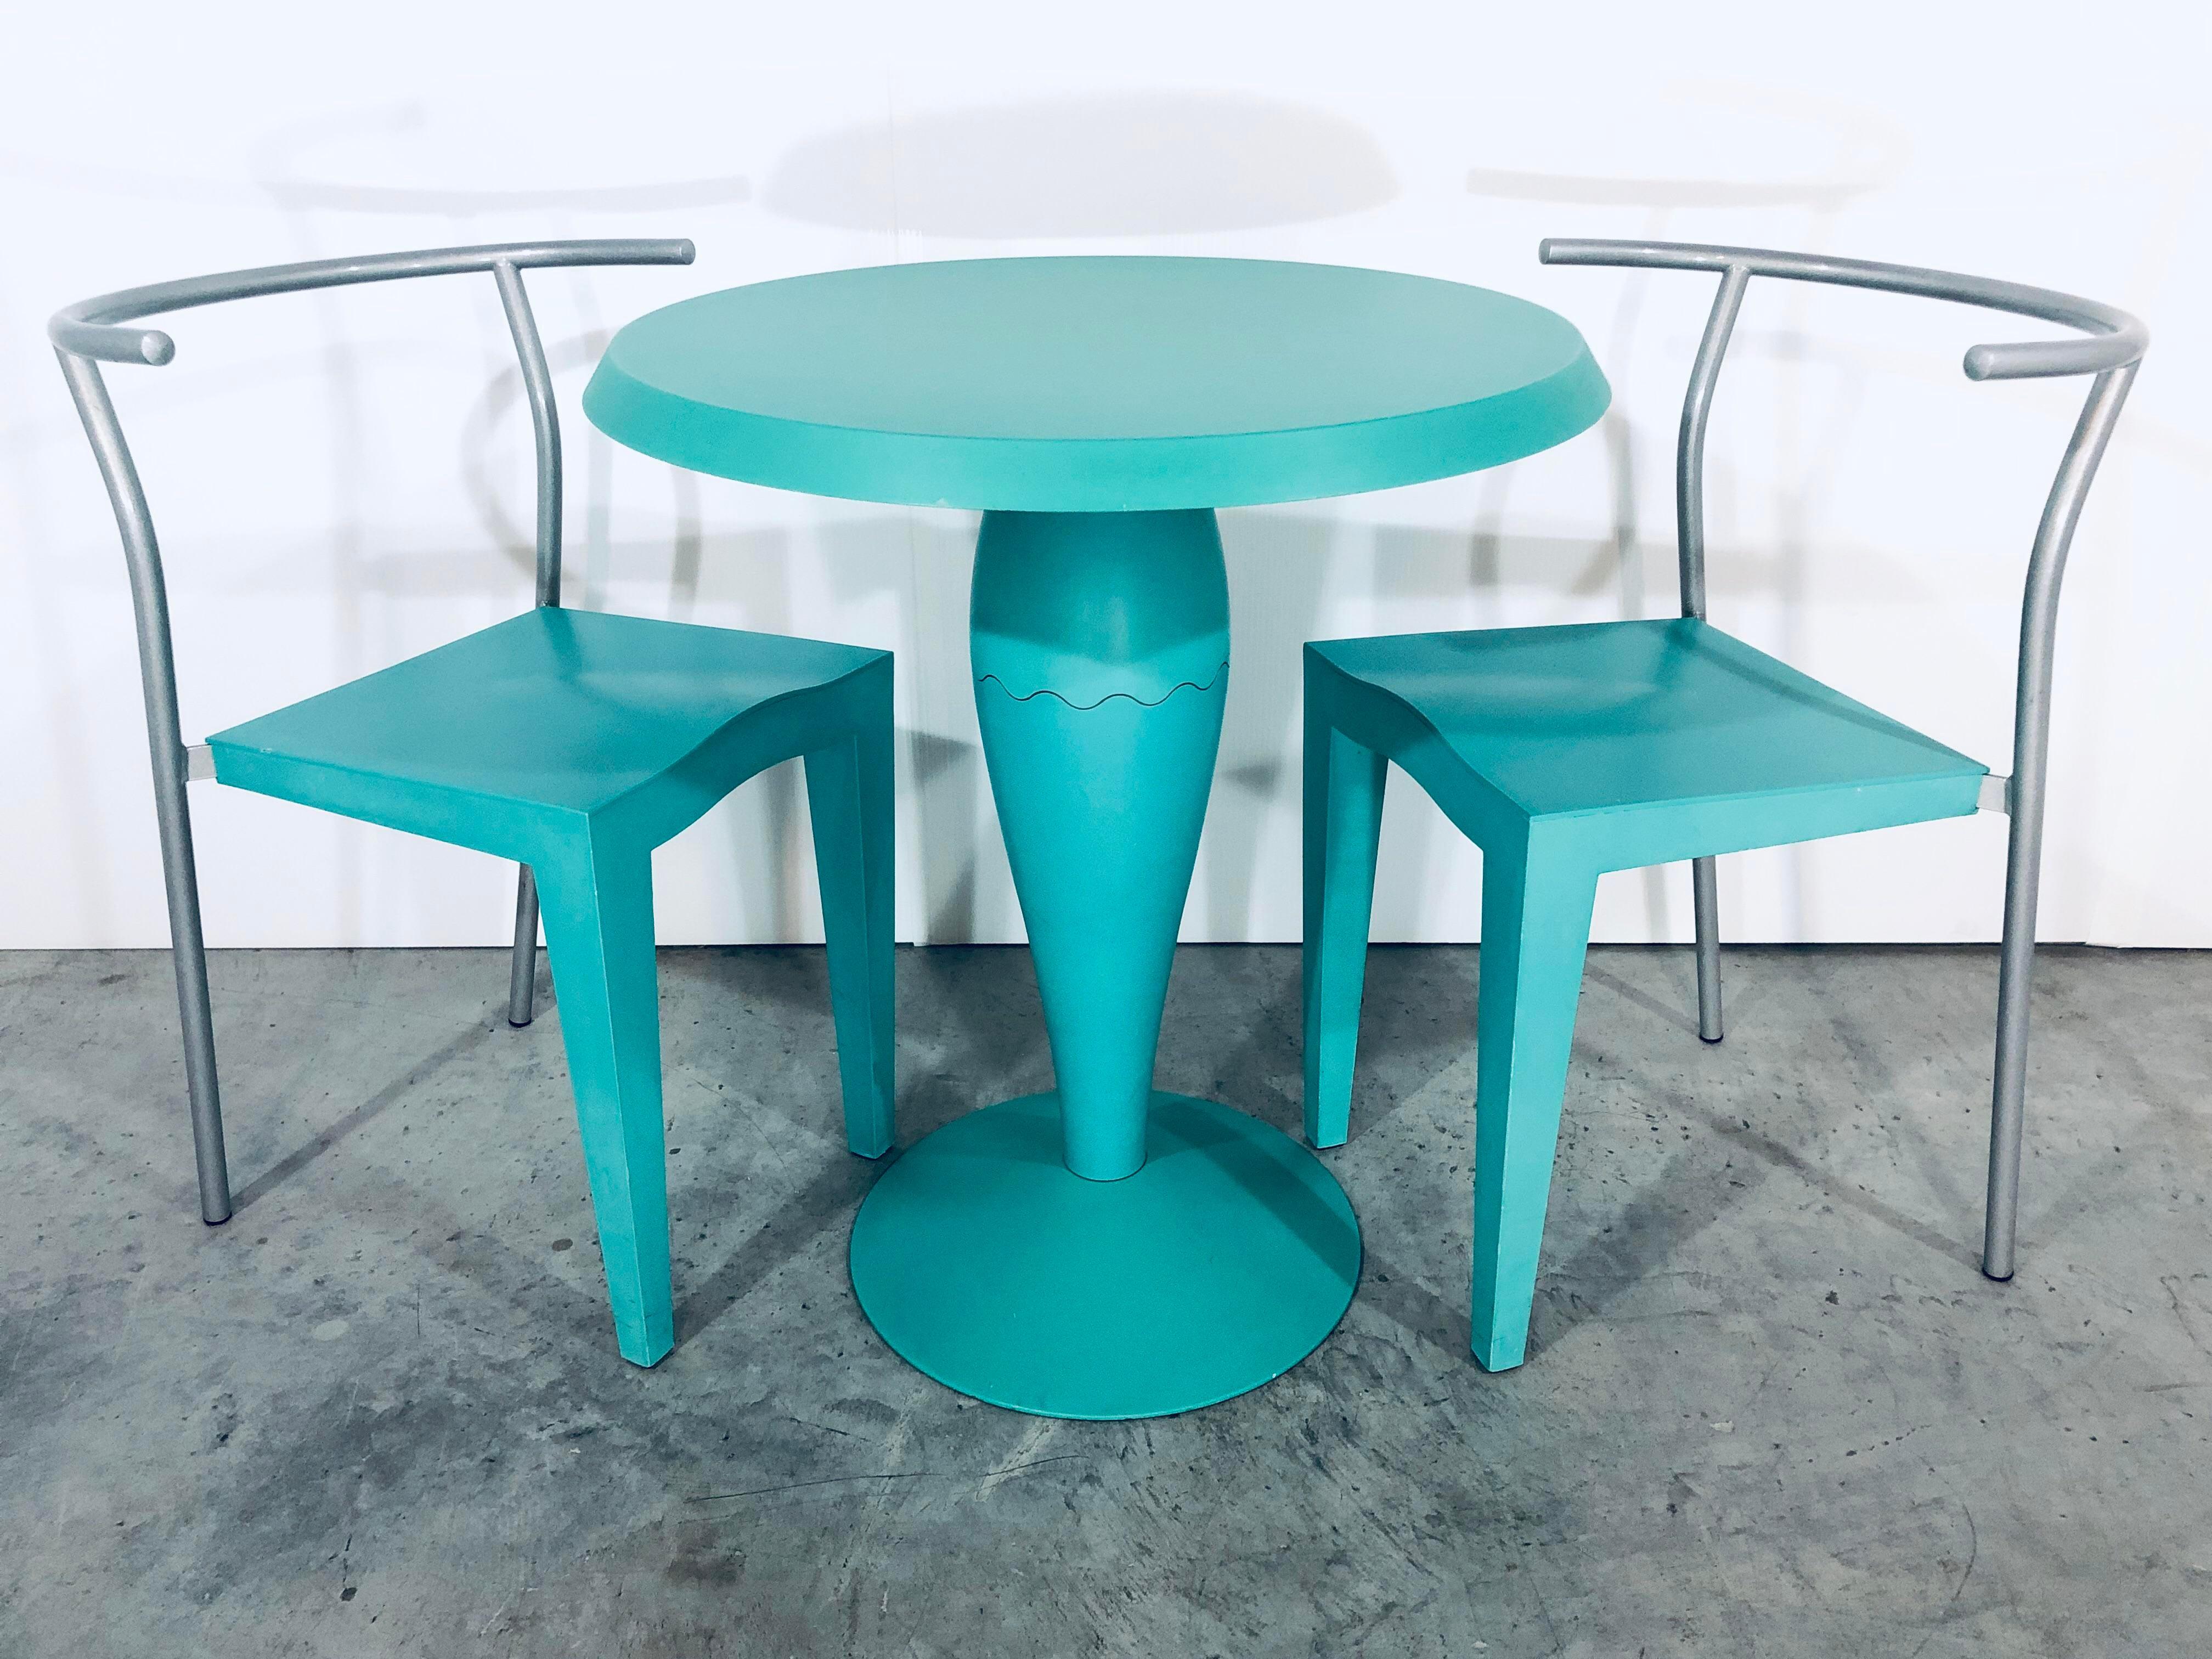 Rare mint green plastic and aluminum Dr Glob chairs and mint green Miss Balu’ bistro table set designed by Philippe Starck for Kartell.

Dimensions:
Chairs:
W 18.5”, D 18”, H 28.5”, SH 18
Table:
W 25”, D 25”, H 28.5”.